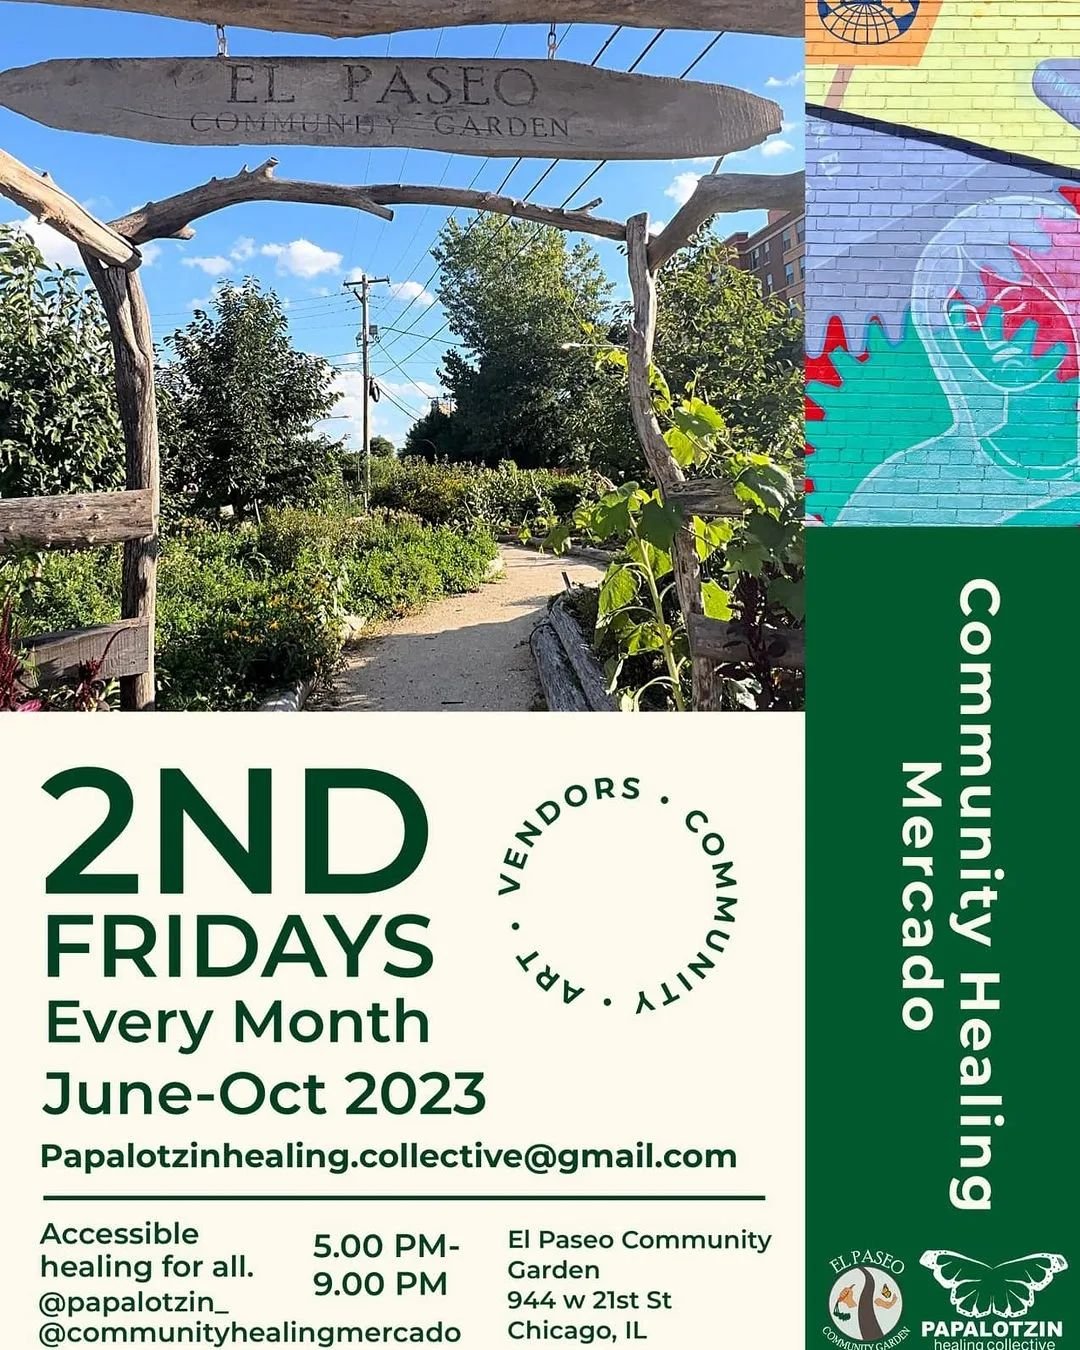 Join us every second Friday in Pilsen. Message @papalotzin_ @pilsenchica for more info.

🦋🎶🧘🏾&zwj;♀️💫🌻

from @pilsenchica :

&quot;Hello fam and friends! 

Today is 2nd Fridays @ El Paseo Community Garden  activating the Community Healing Merca